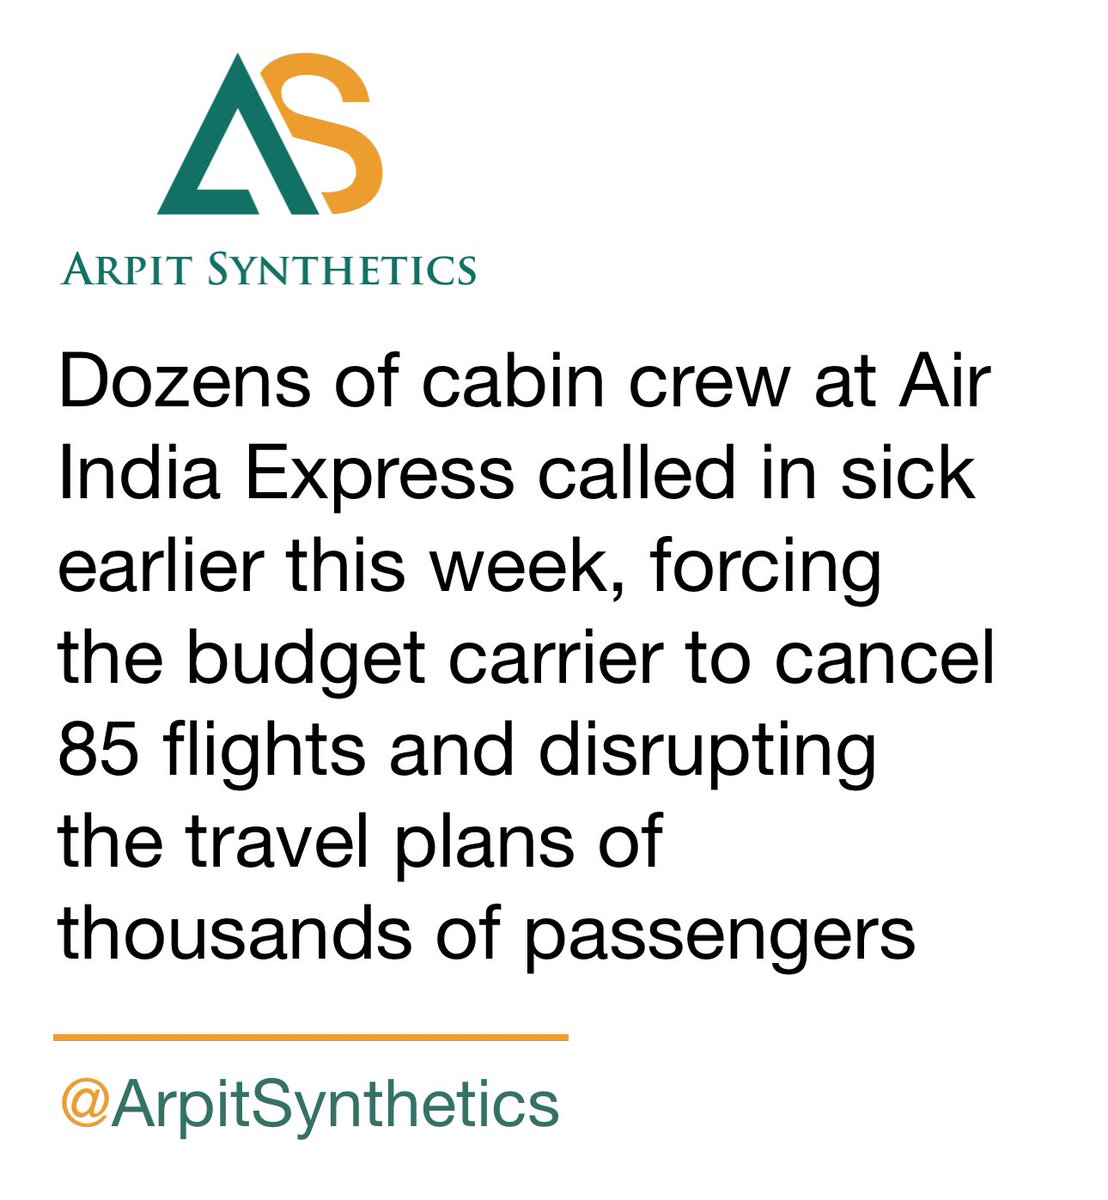 #chemicalupdate #arpitsynthetics #chemical #worldchemistry #innovation #industry #engineering #hygiene #global #AI #polymer #apple #color #colour #india #leader #partnership #biodegradable #recycle #recycled #fibre #landfill #ocean #Artificalintelligence #asia #usa #uk #africa